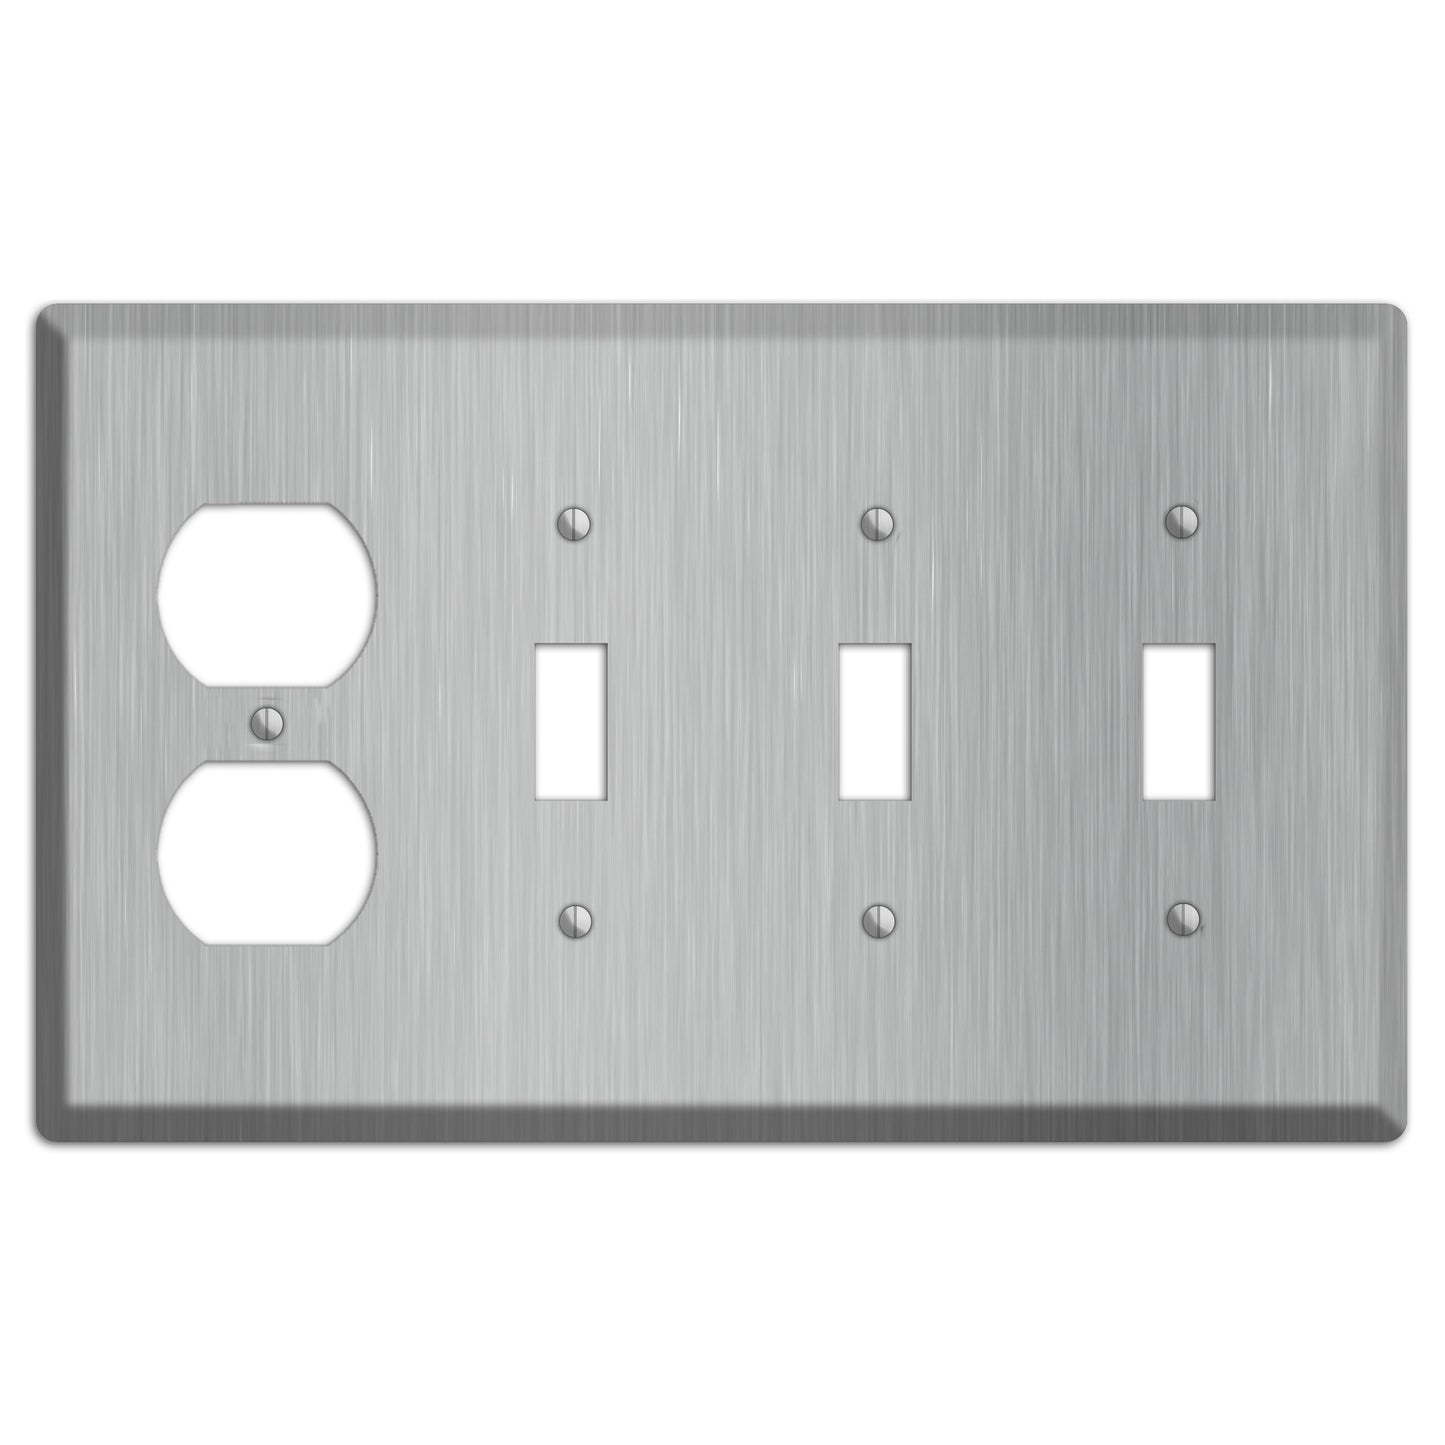 Brushed Stainless Steel Duplex / 3 Toggle Wallplate